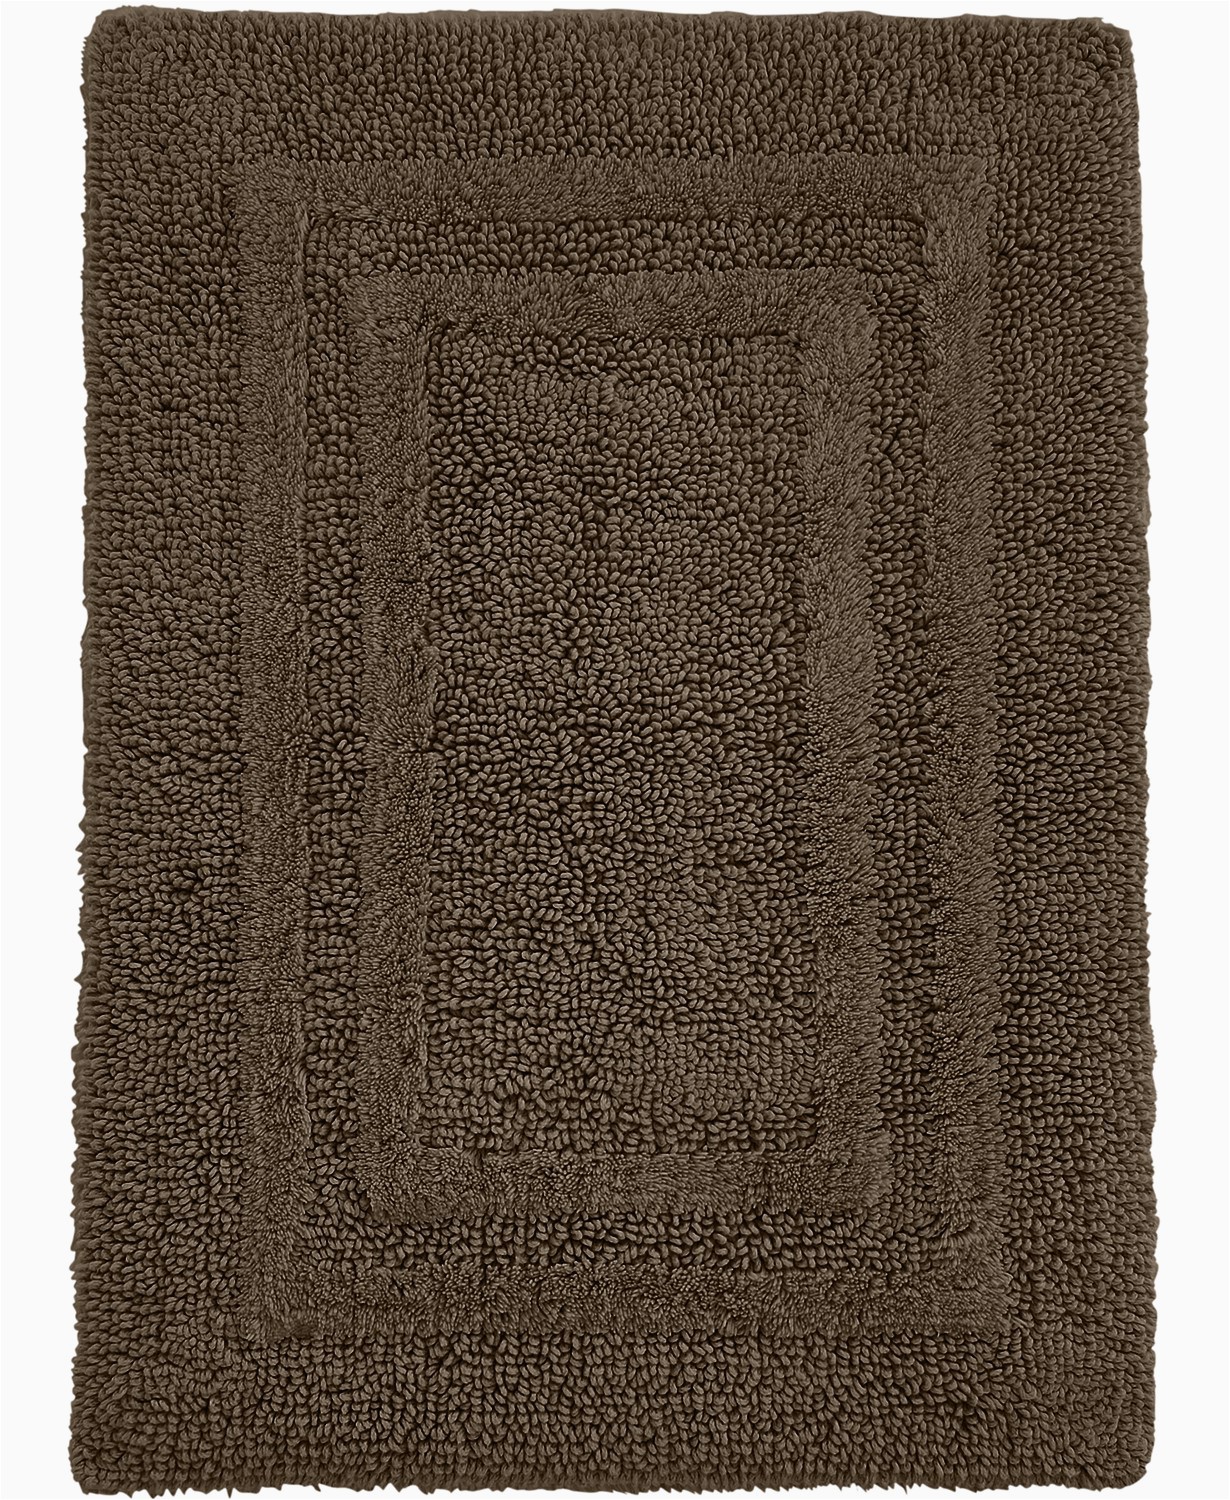 Hotel Collection Reversible Bath Rug Hotel Collection Cotton Reversible 18 Inches X 25 Inches Bath Rug Pamper Your Feet with This Super soft Reversible Bath Rug Chocolate